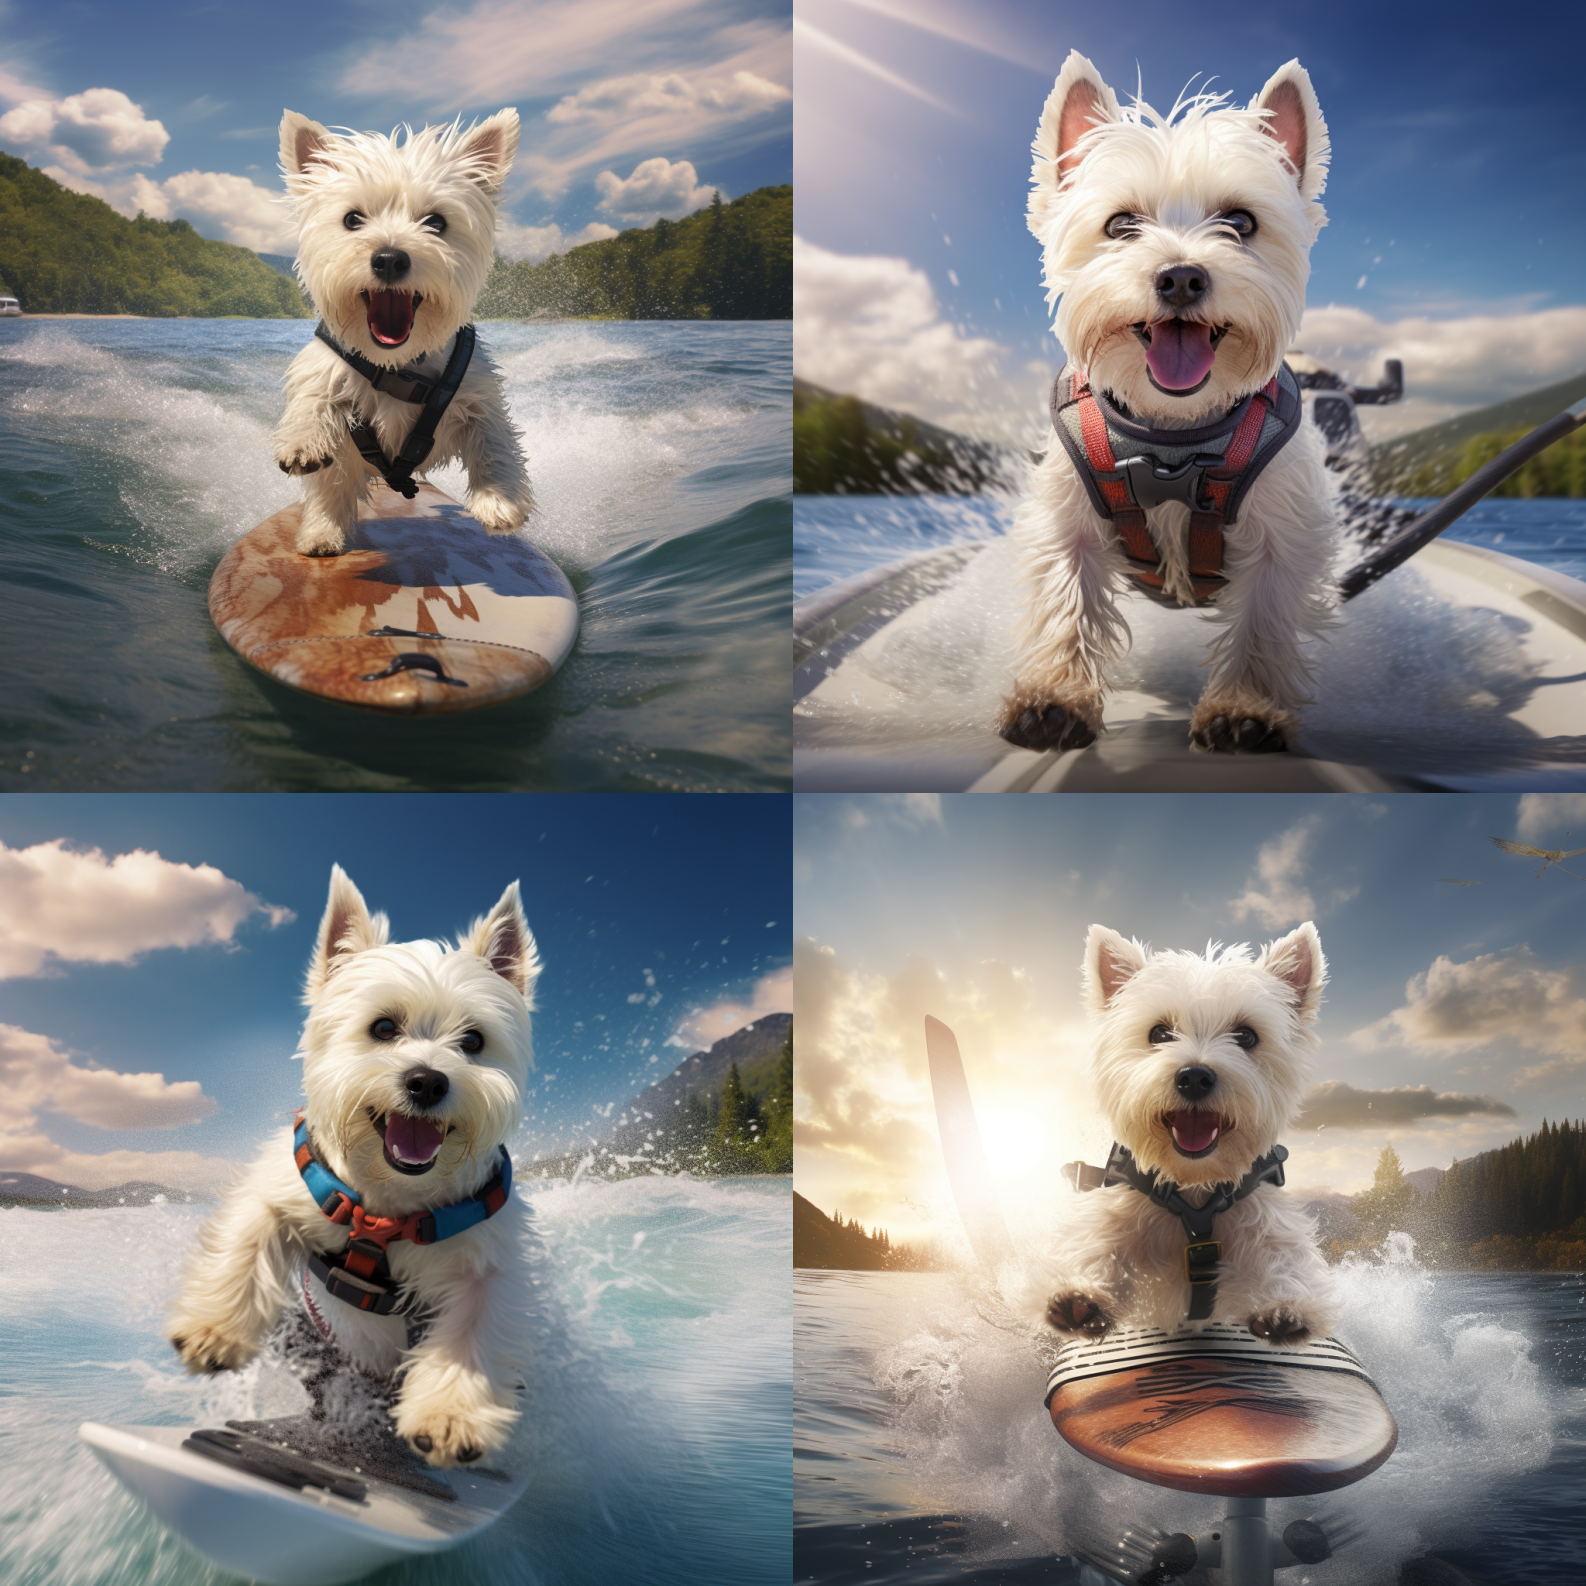 deckard7316_photorealistic_west_highland_terrier_on_waterskis_o_138c2617-0044-452d-a9bd-3958fdedc8d1.png